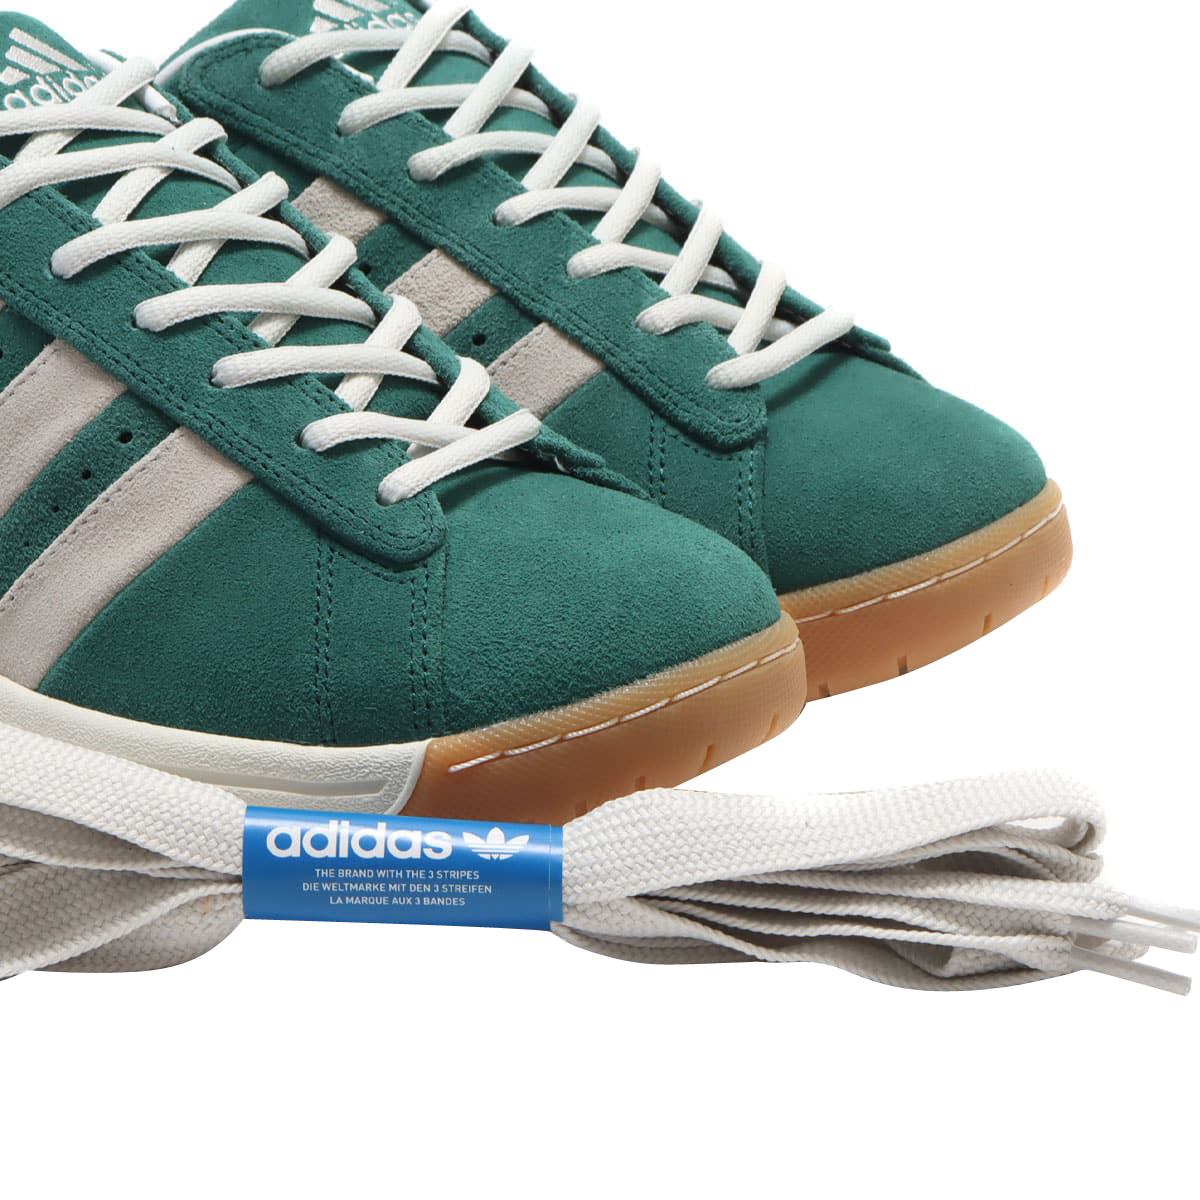 atmos x adidas Campus Supreme Sole College Green IF9989 